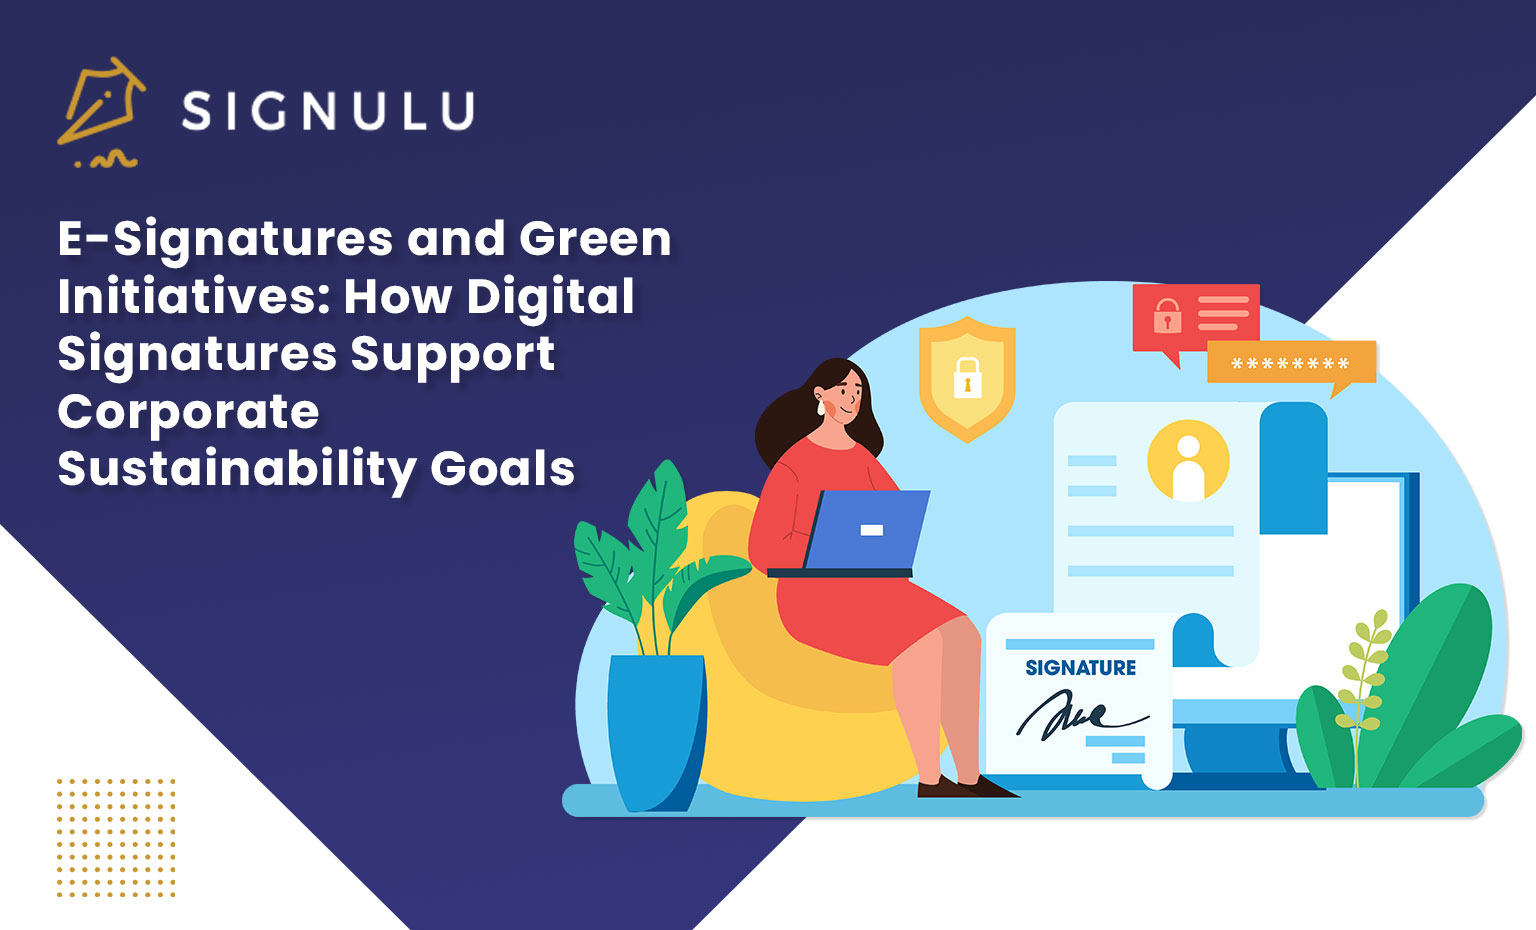 E-Signatures and Green Initiatives: How Digital Signatures Support Corporate Sustainability Goals